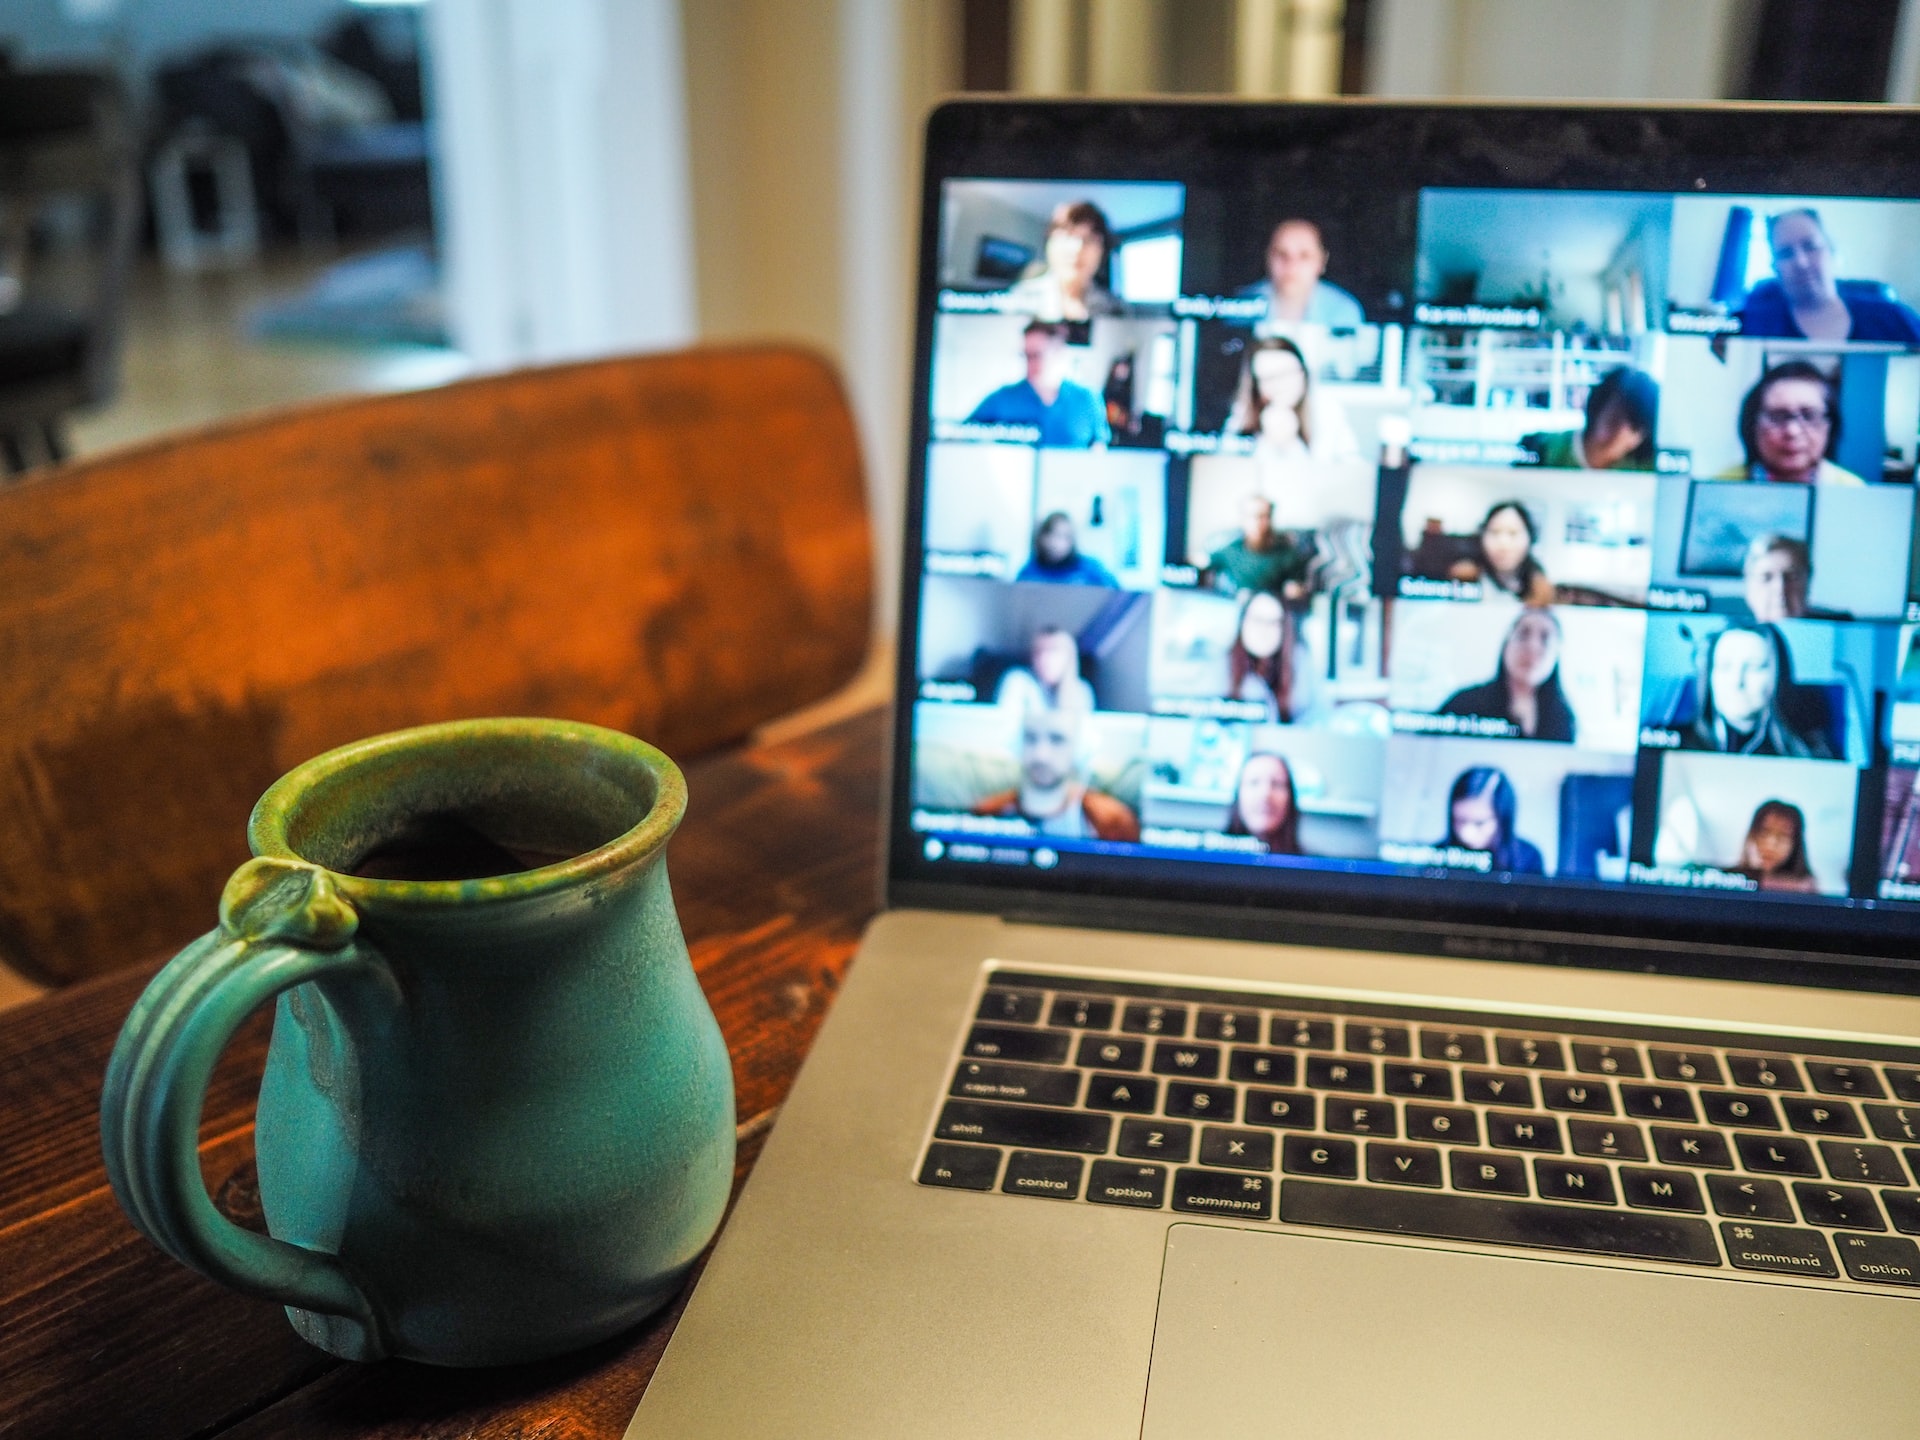 image-of-a-laptop-screen-showing-many-people-on-a-Zoom-meeting-next-to-a-cup-of-coffee